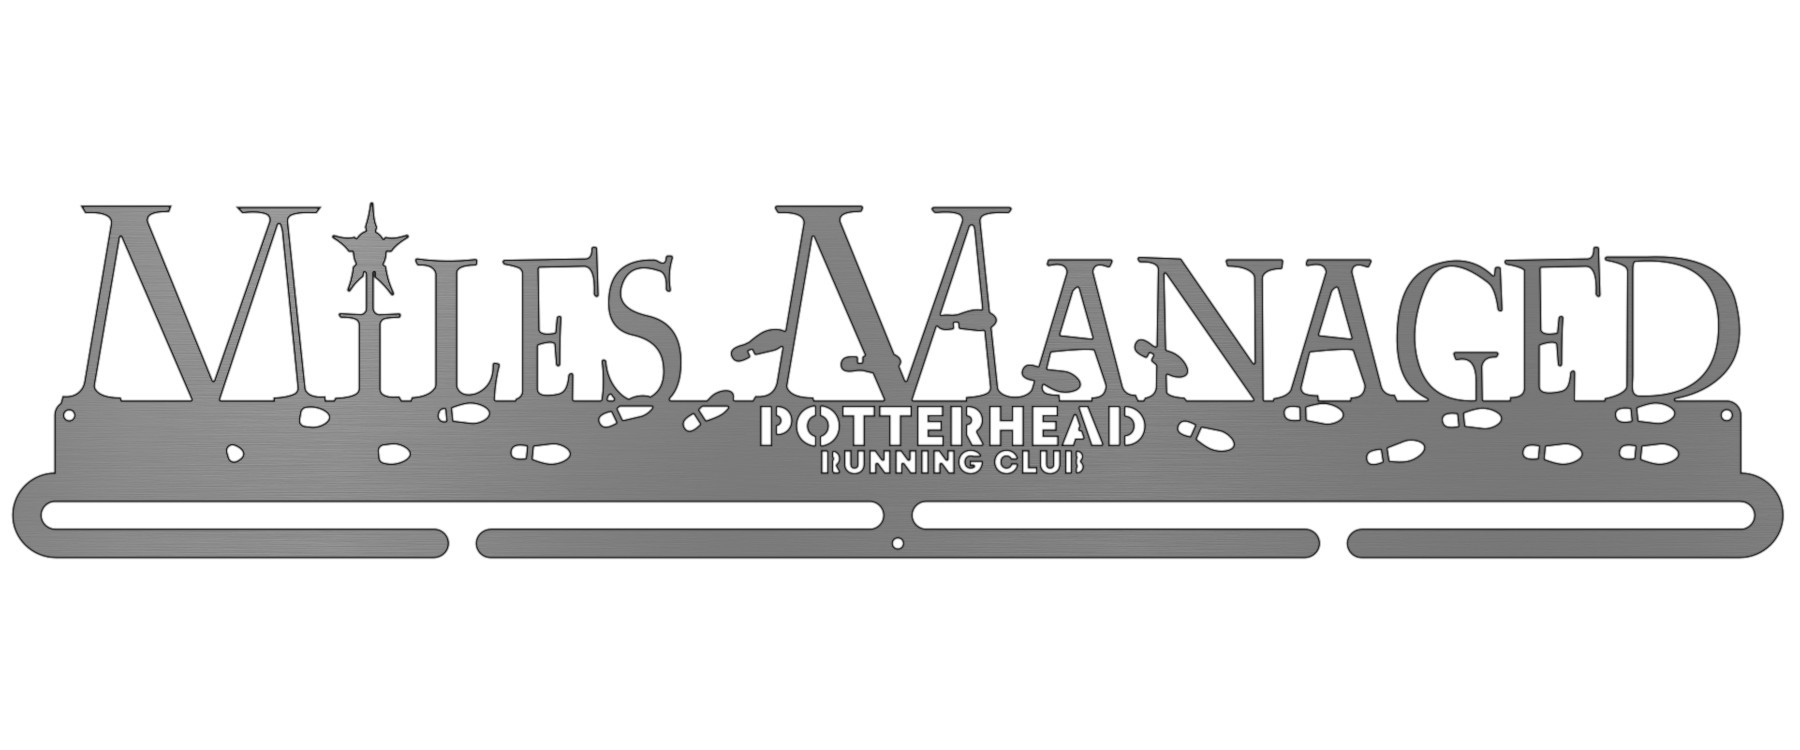 Potter Head Running Club - Miles Managed